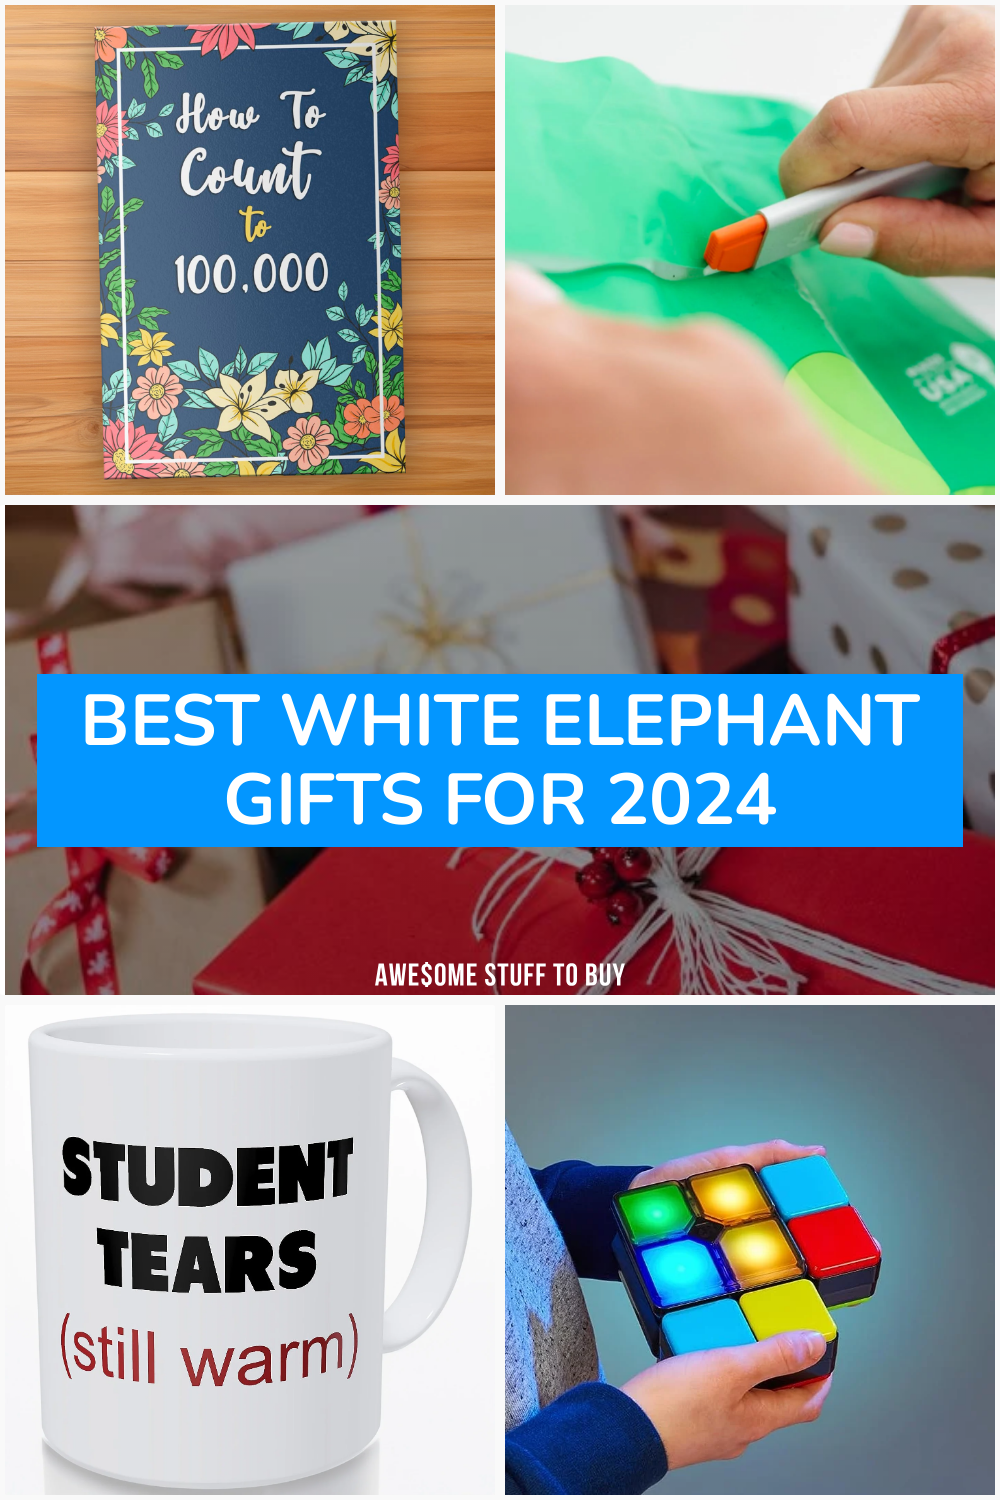 White Elephant Gifts // Awesome Stuff to Buy